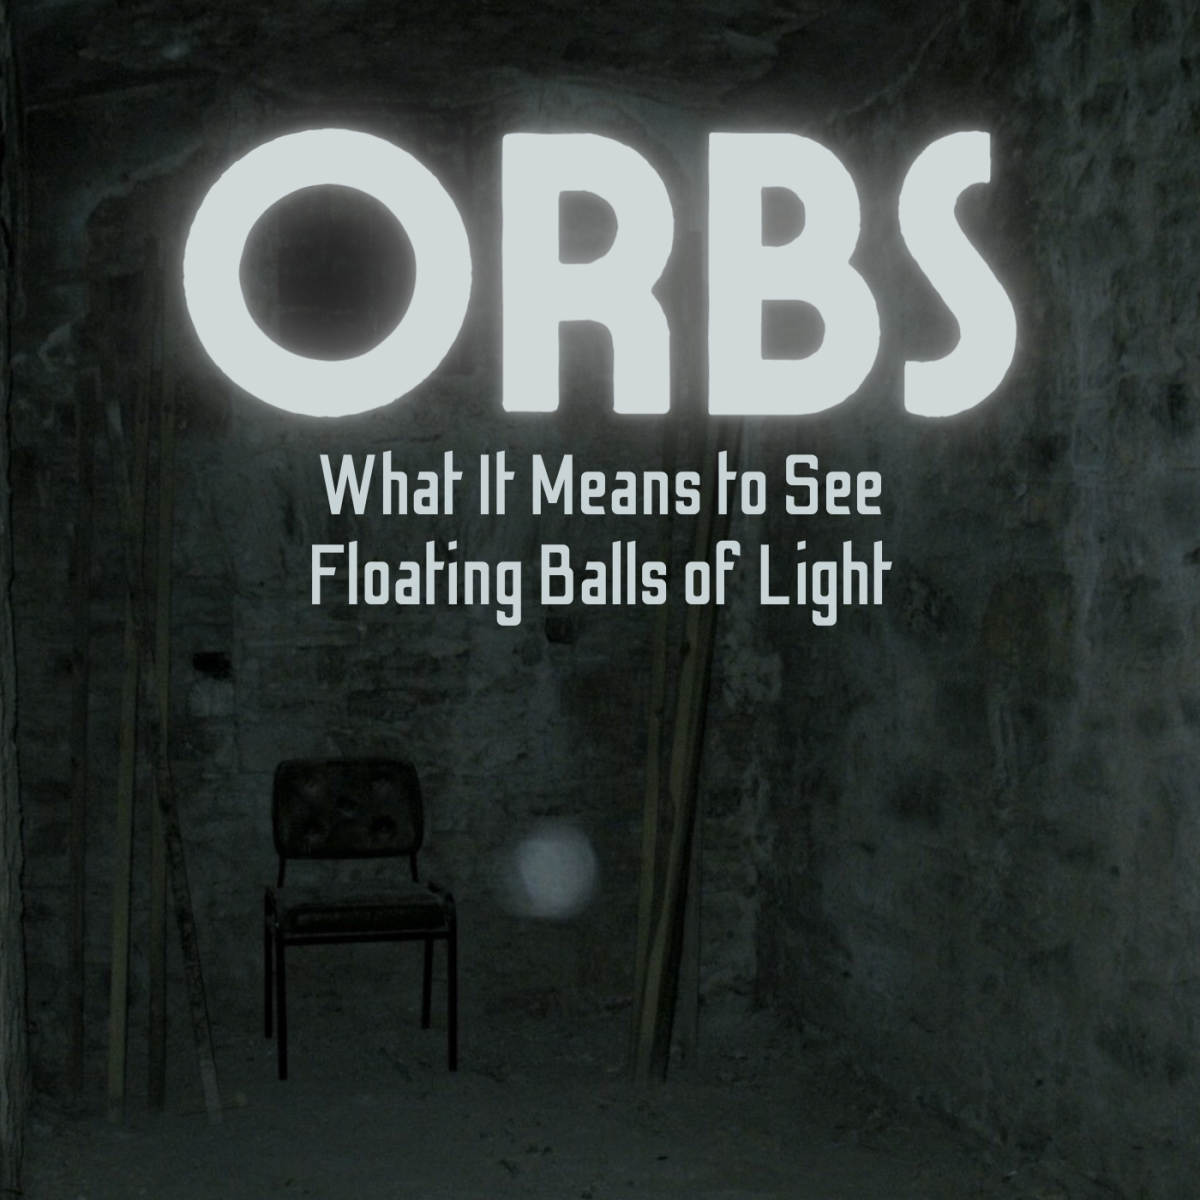 Seeing Orbs With the Naked Eye